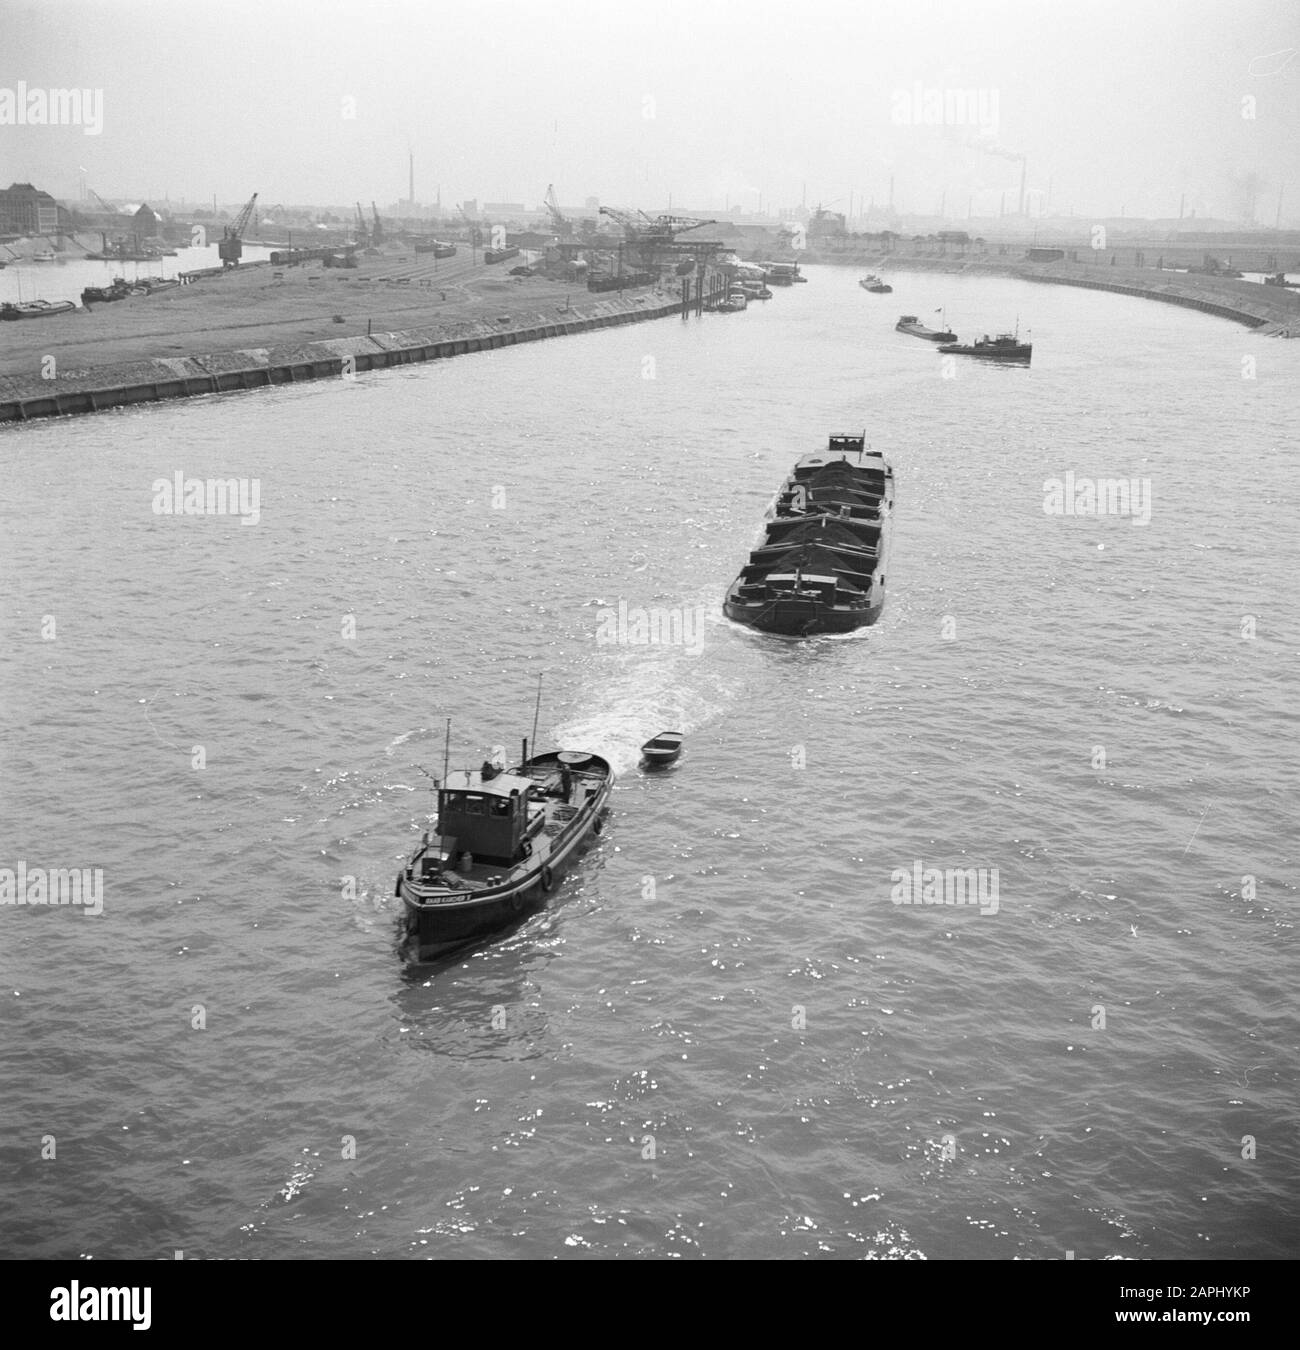 Rijnvaart, report from tug Damco 9: West Germany Description: The tug Raab  Kärcher V on the Rhine, seen from the Friedrich-Eber-Brücke Date: 1 April  1955 Location: Duisburg, Germany, West Germany Keywords: Inland